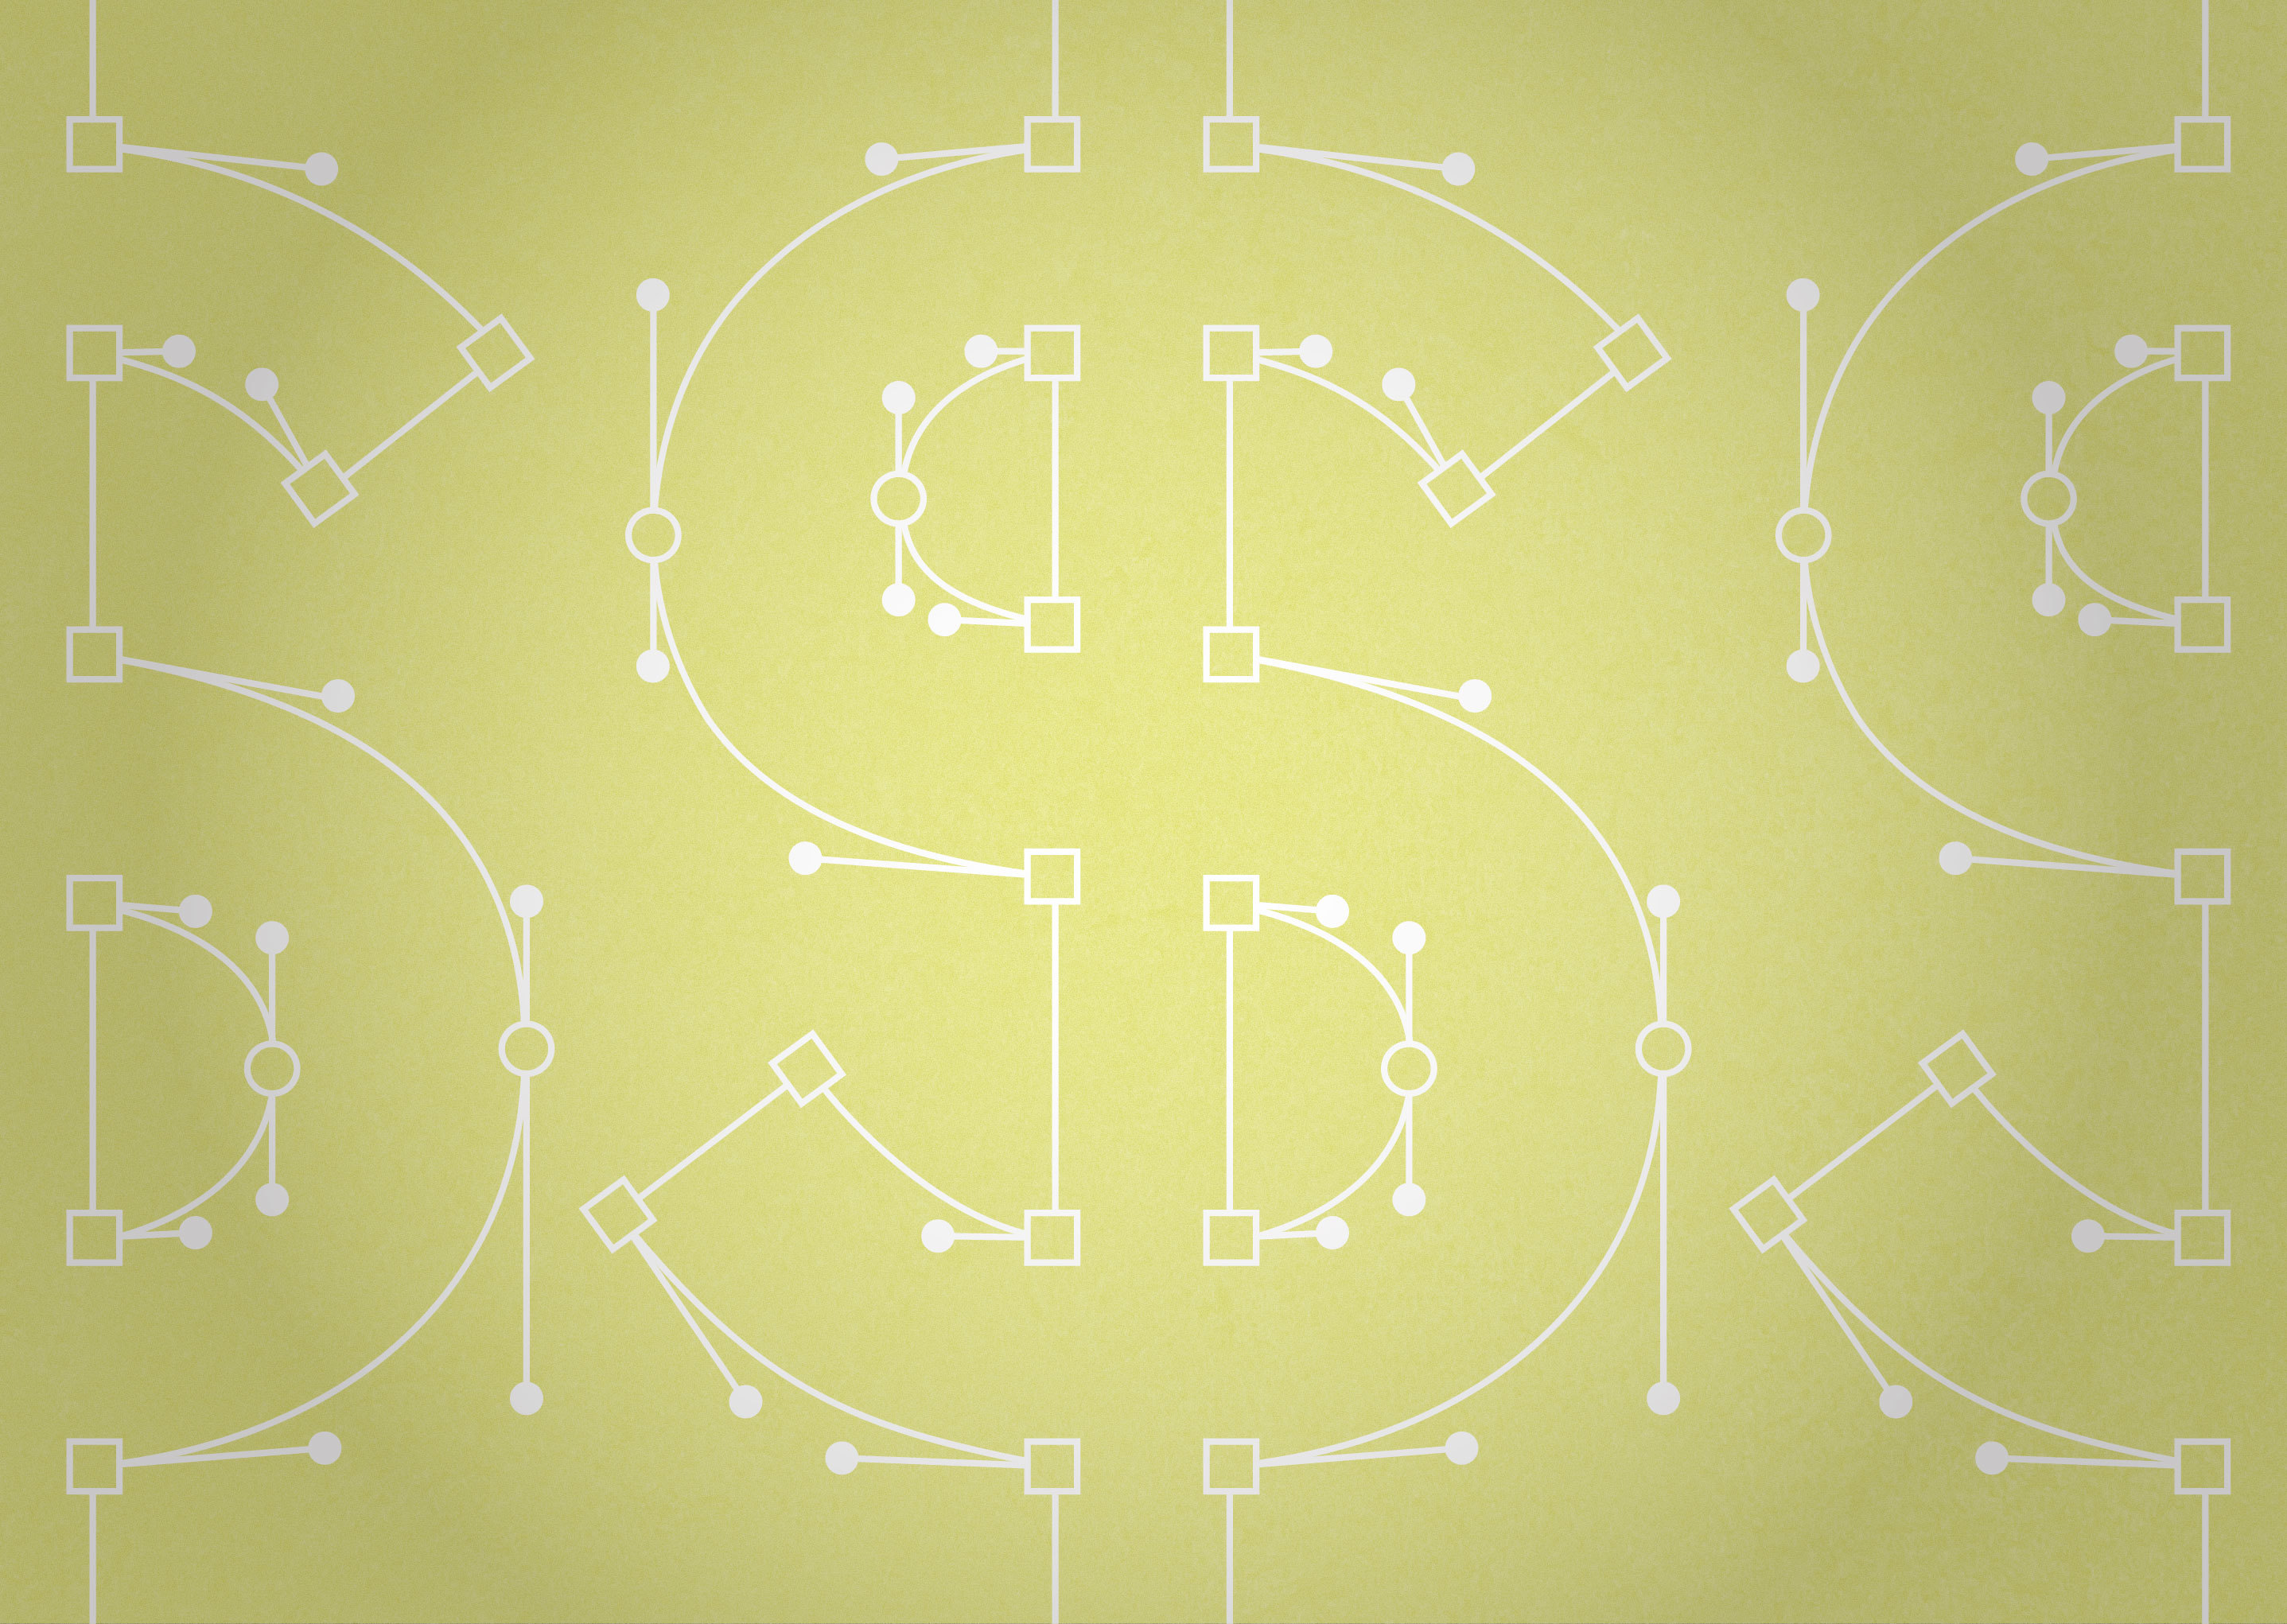 Illustration of dollar signs with bezier points